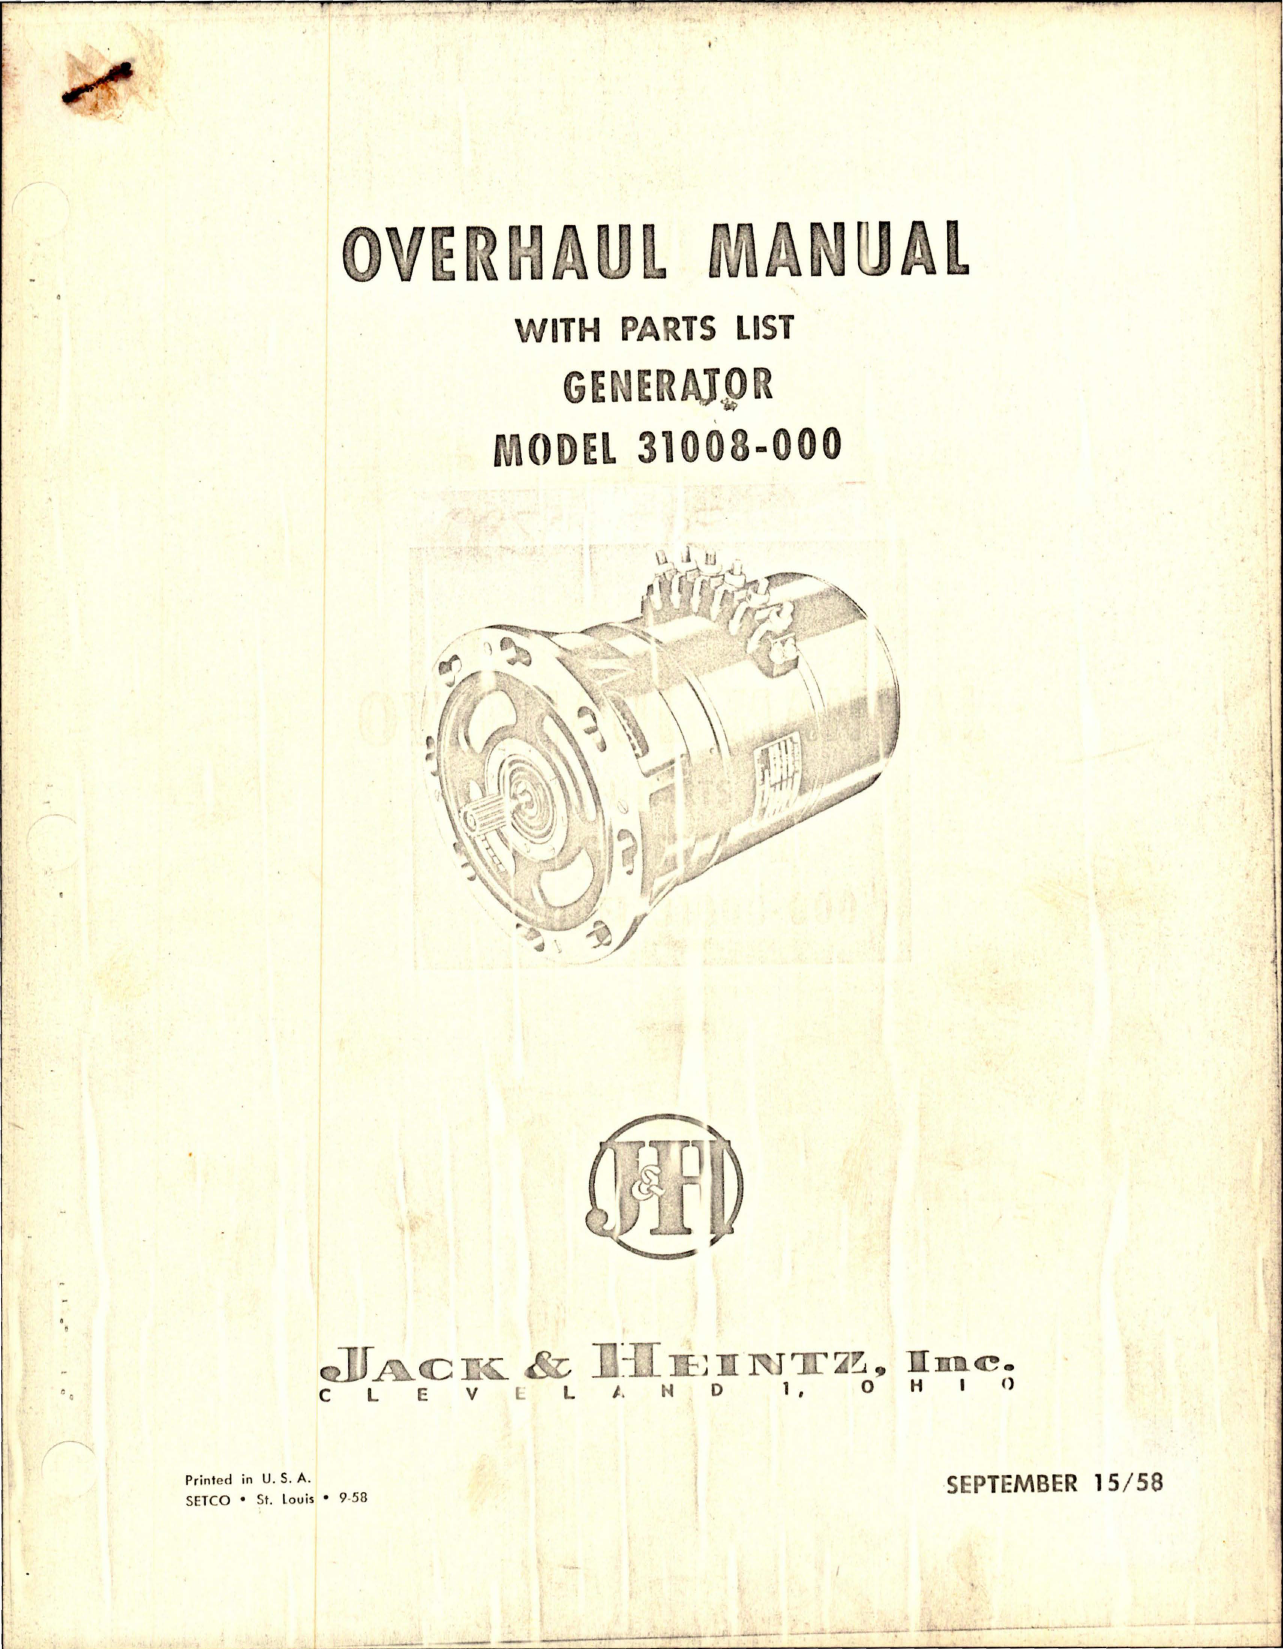 Sample page 1 from AirCorps Library document: Overhaul Manual w Parts List for Generator - Model 31008-000